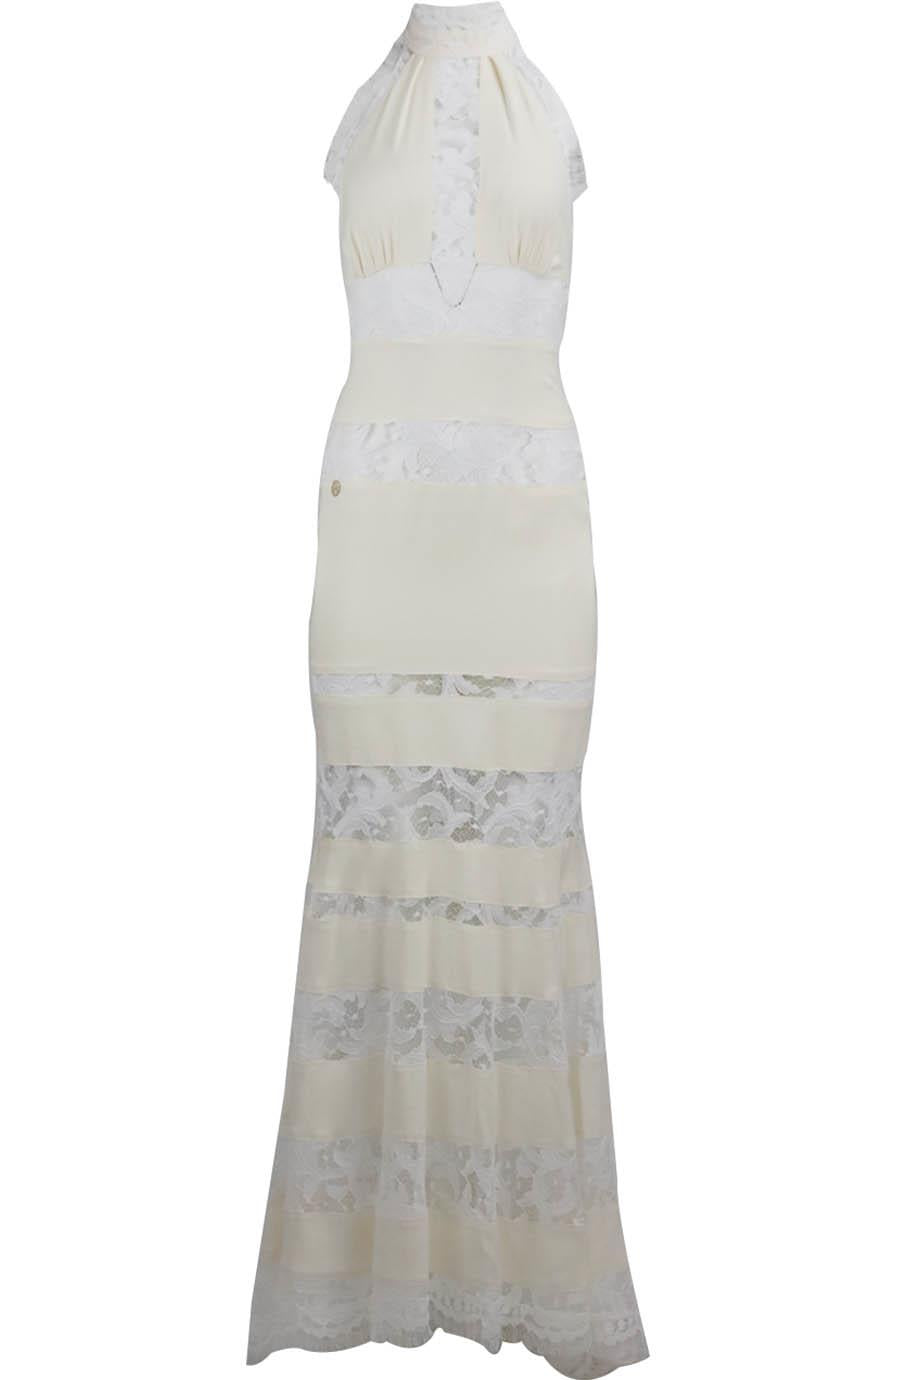 PHILIPP PLEIN TIERED LACE AND CREPE MAXI DRESS XSMALL